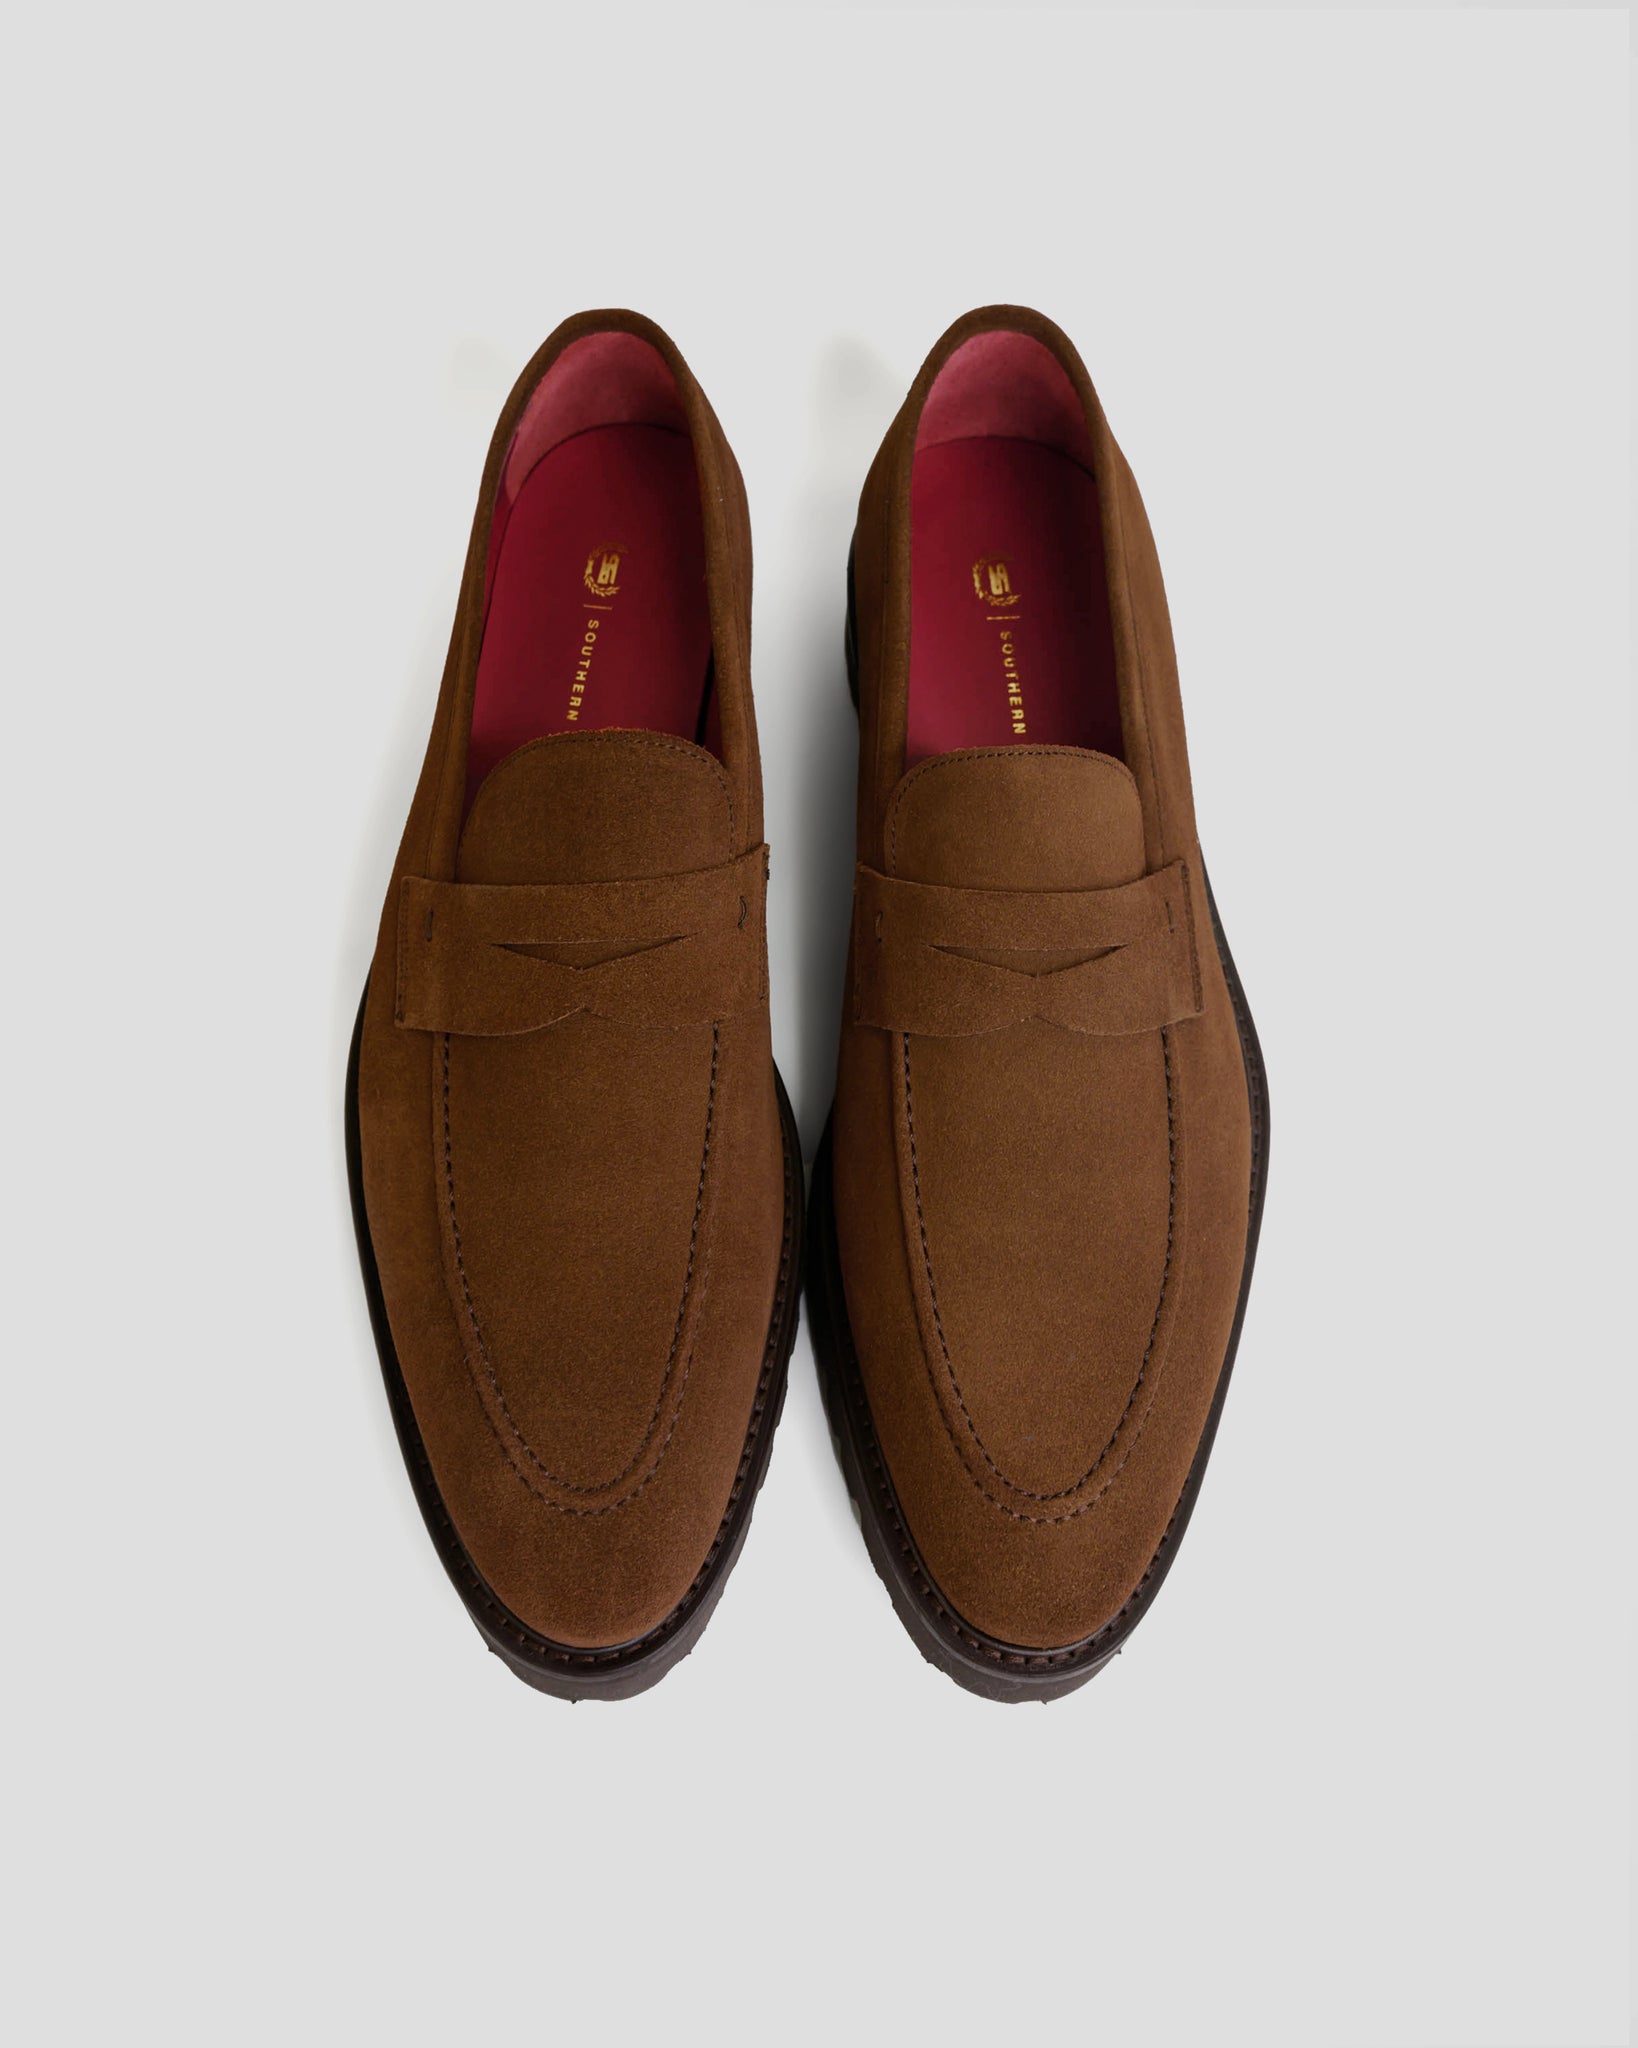 Southern Gents Lug Sole Loafer - Brown Suede